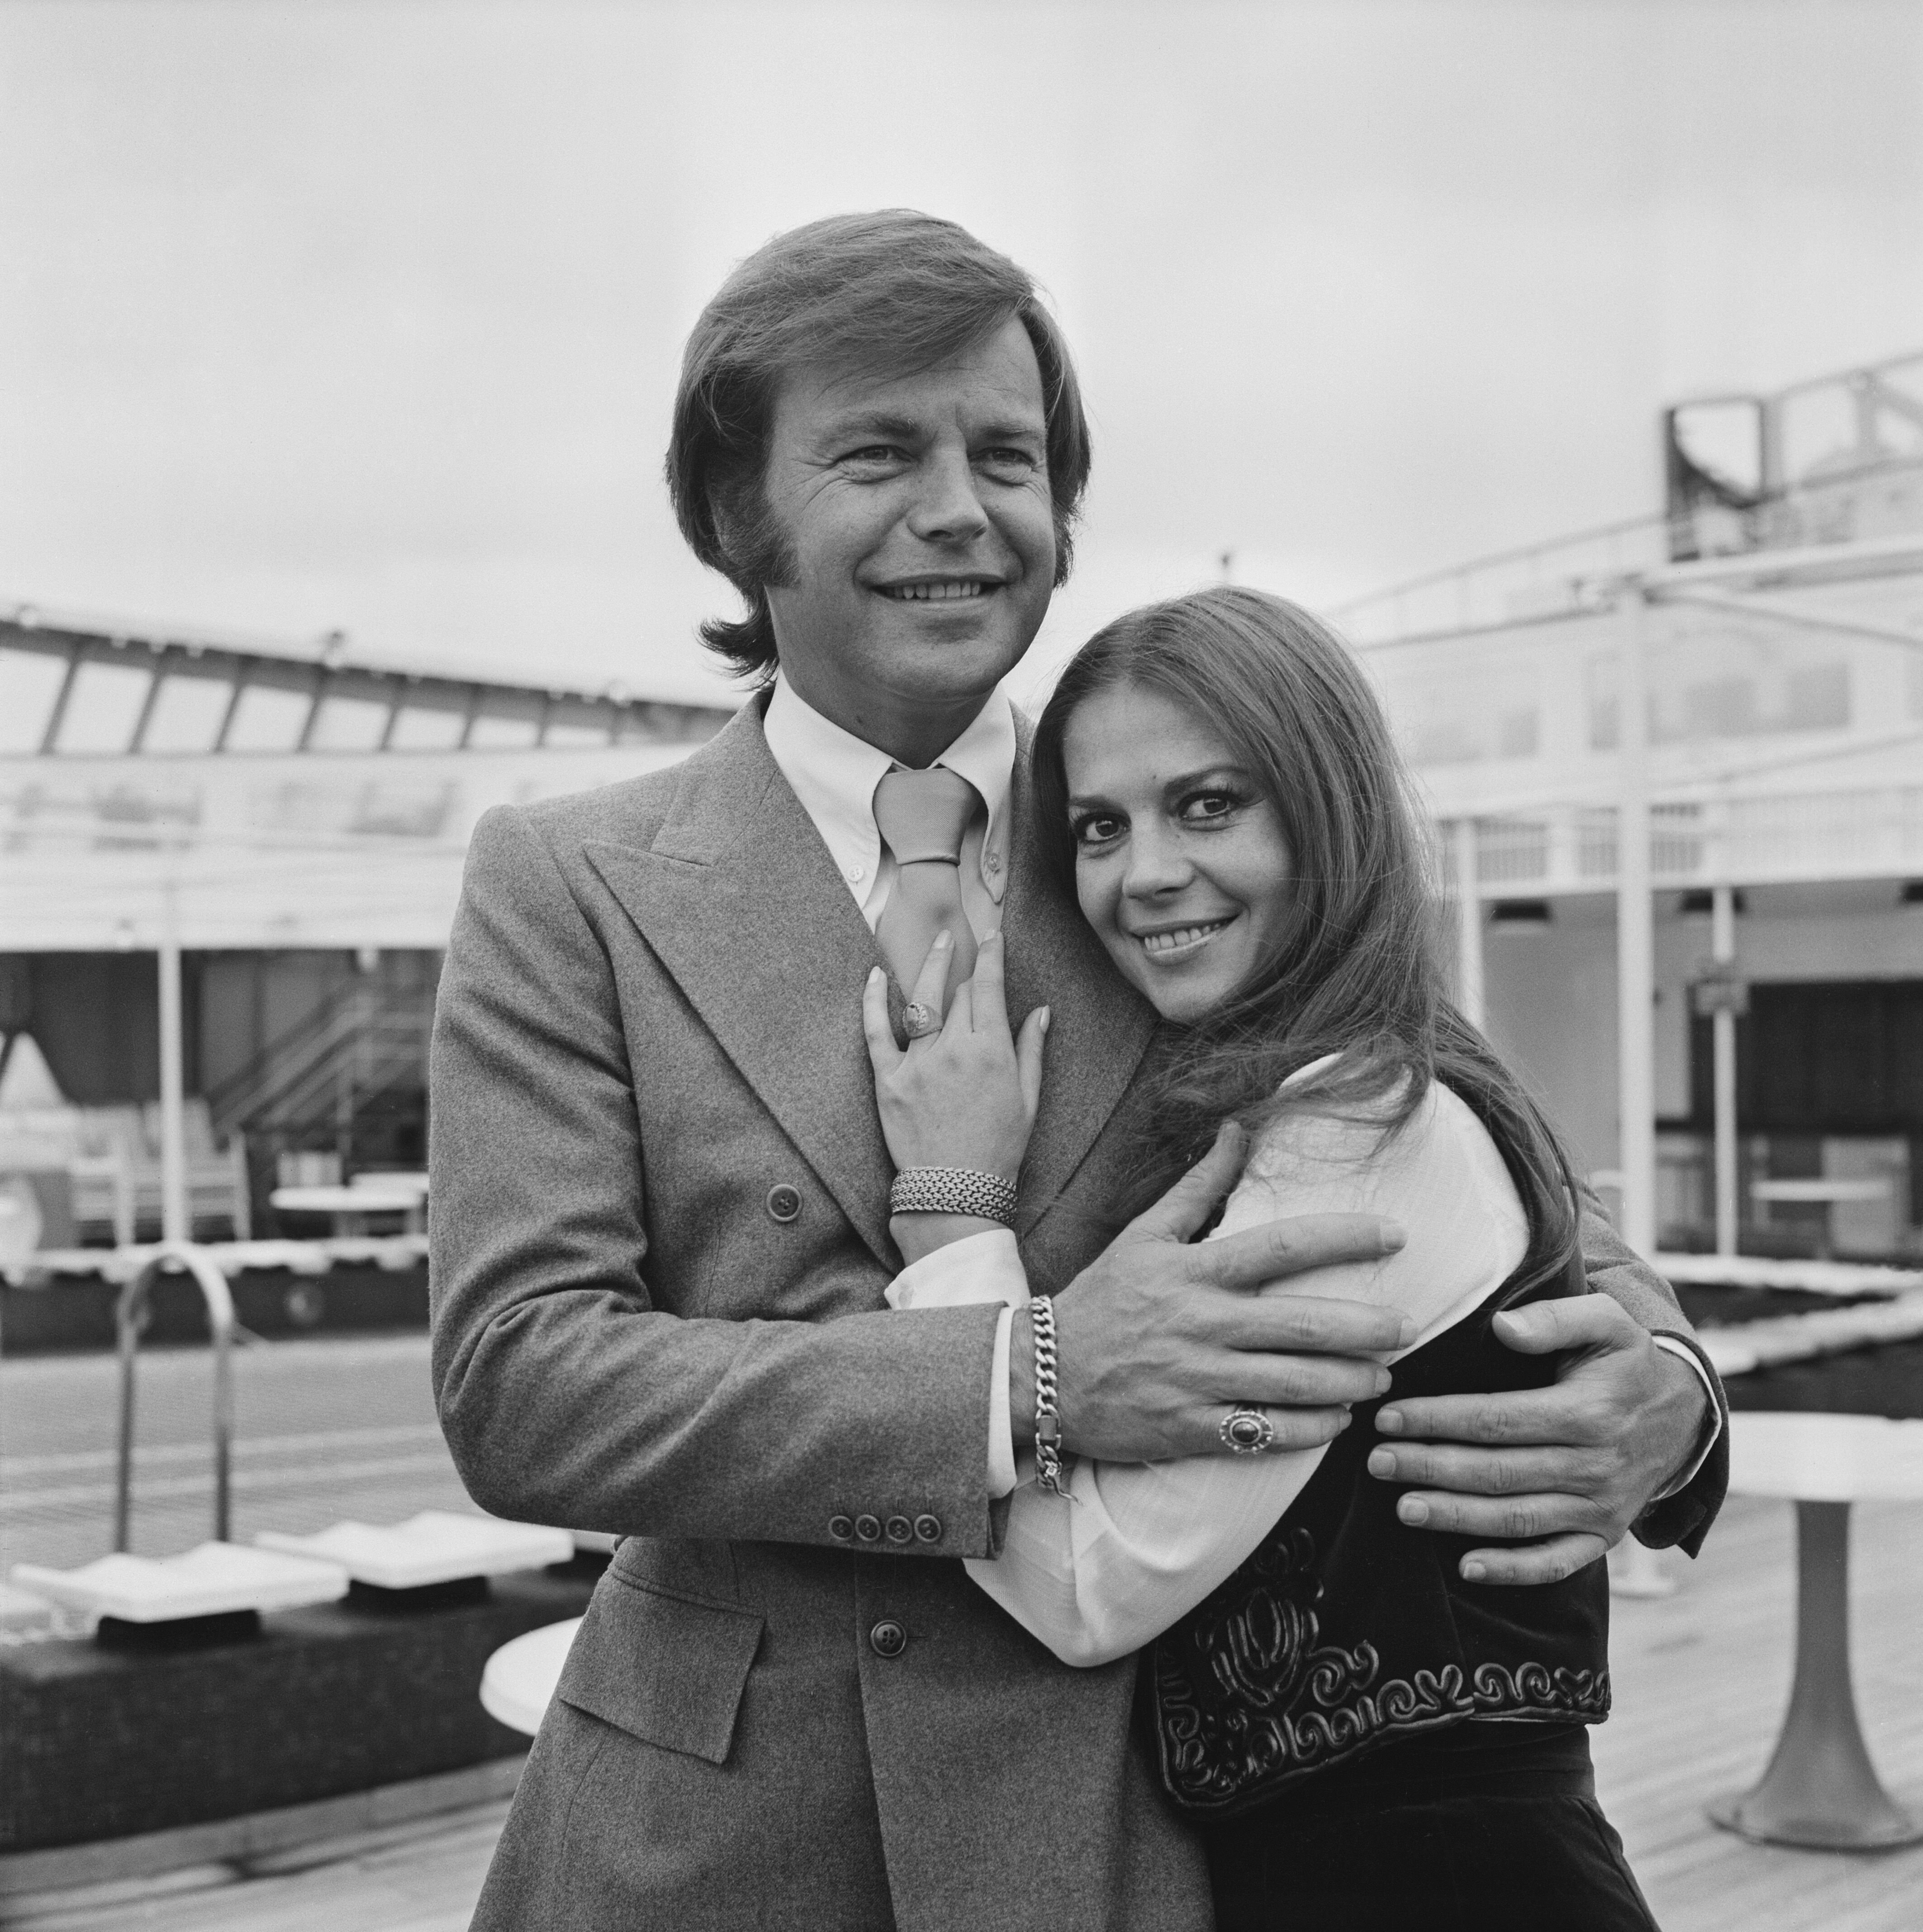 Robert Wagner with his former wife American actress Natalie Wood, 23rd April 1972. | Source: Getty Images